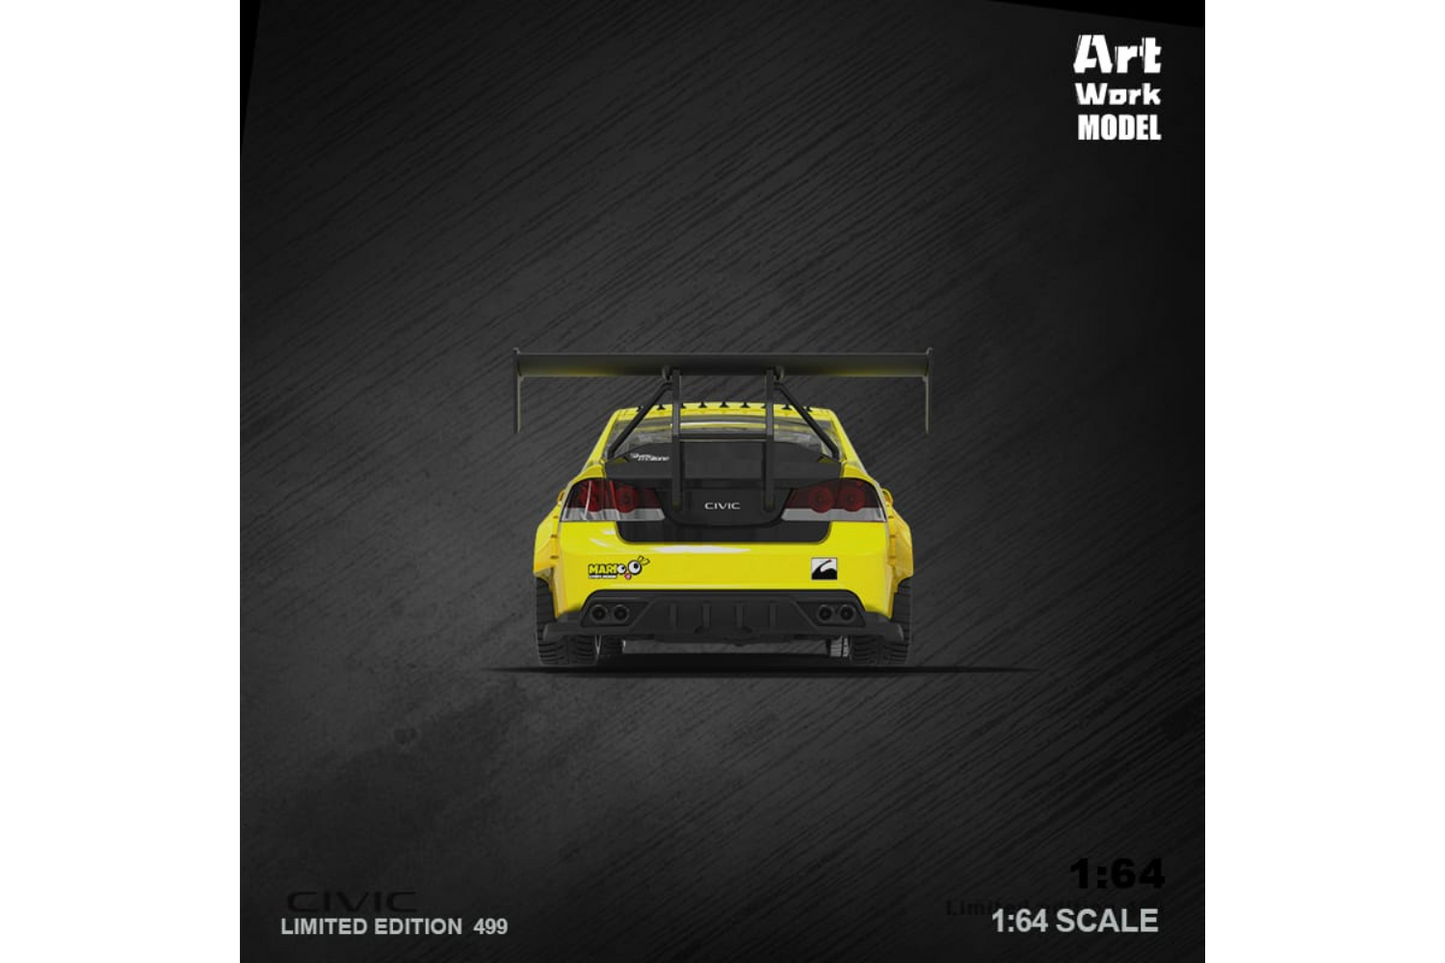 Time Micro 1/64 Honda Civic (FD2) Track Edition in Spoon Livery